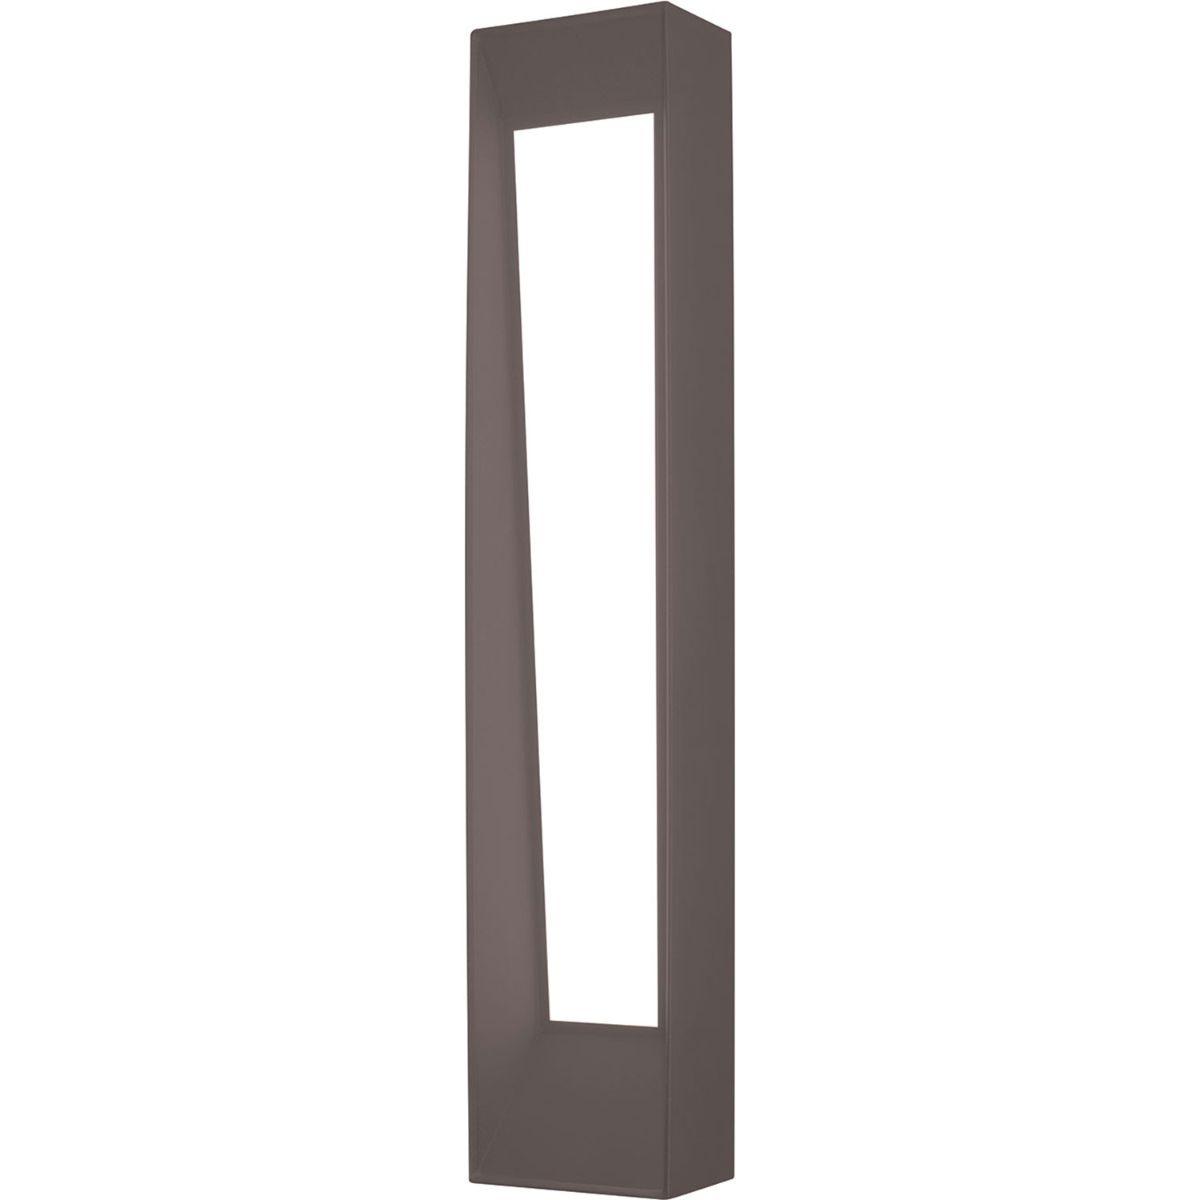 Rowan 36 in. LED Outdoor Wall Sconce